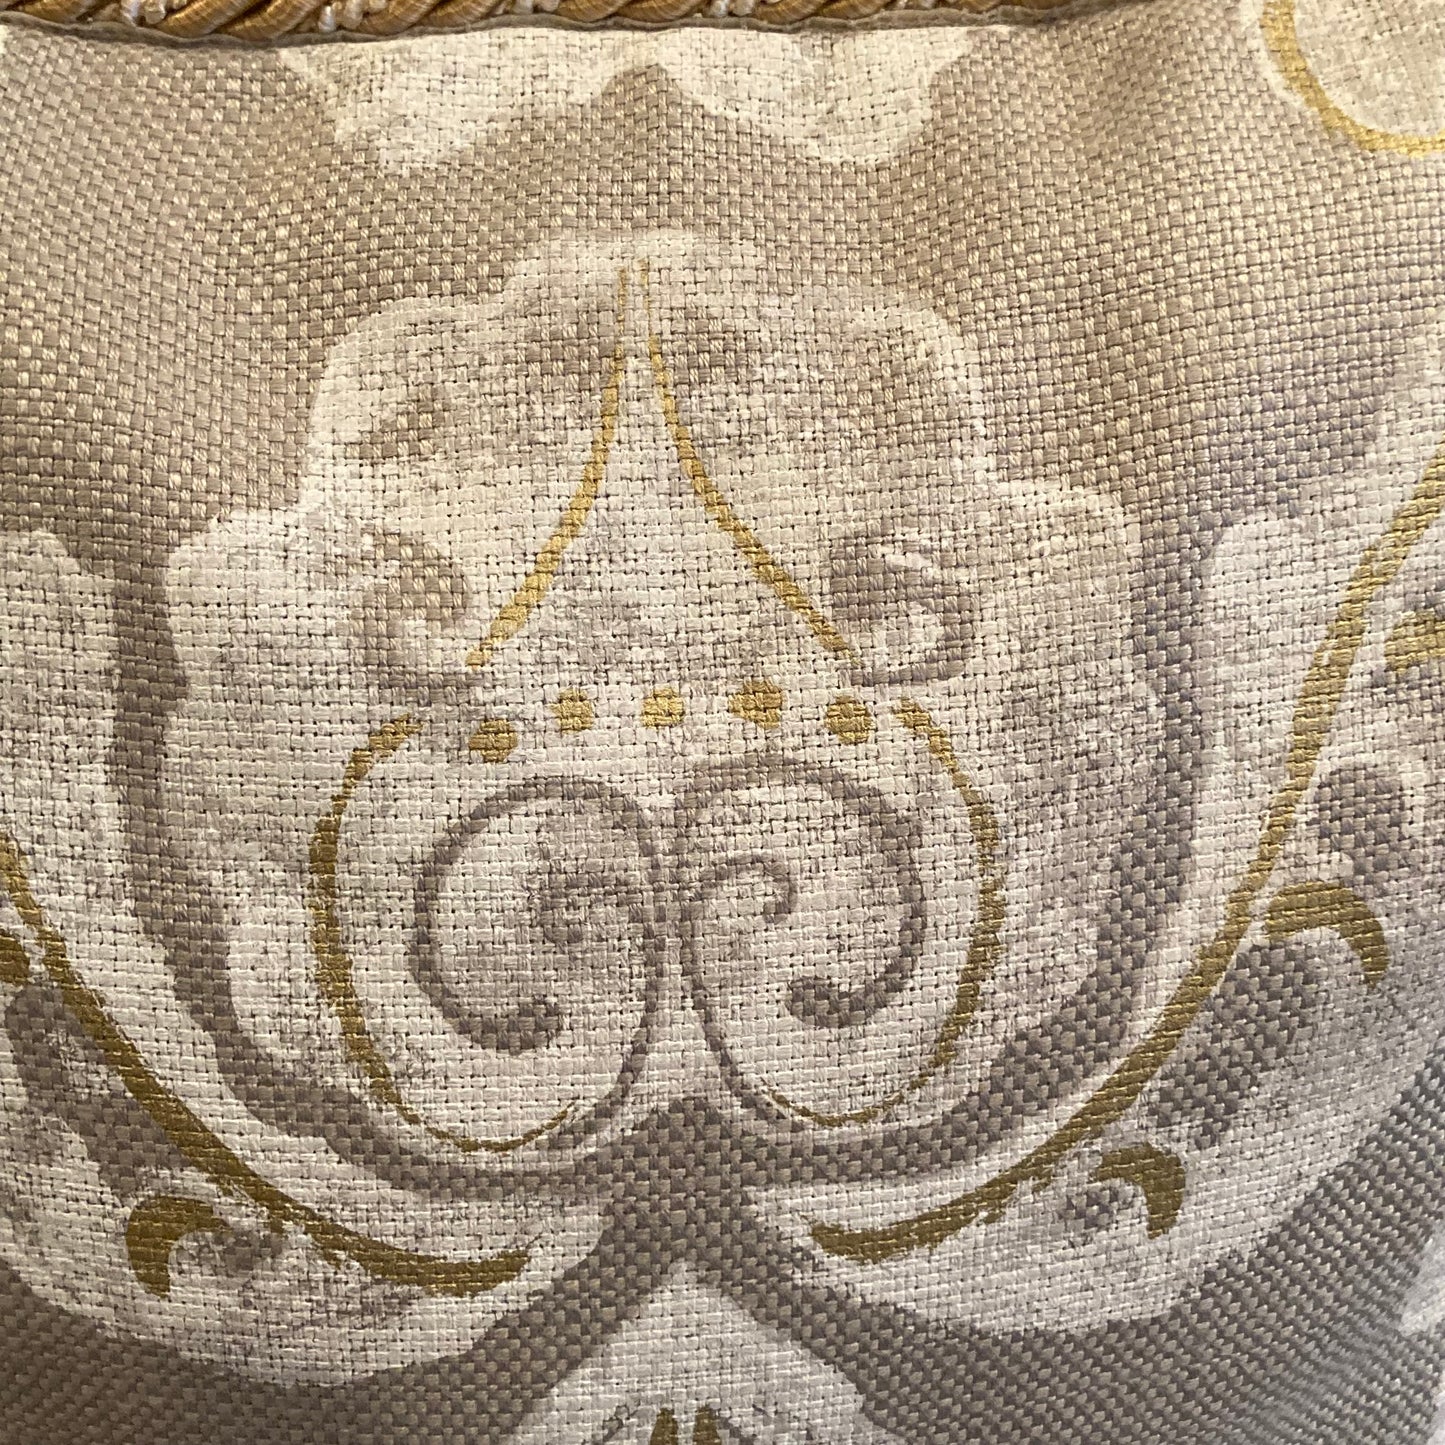 Brocatello Glam Damask 18 x 18 Inches Square Designer Pillow Close up with Down Feather Insert